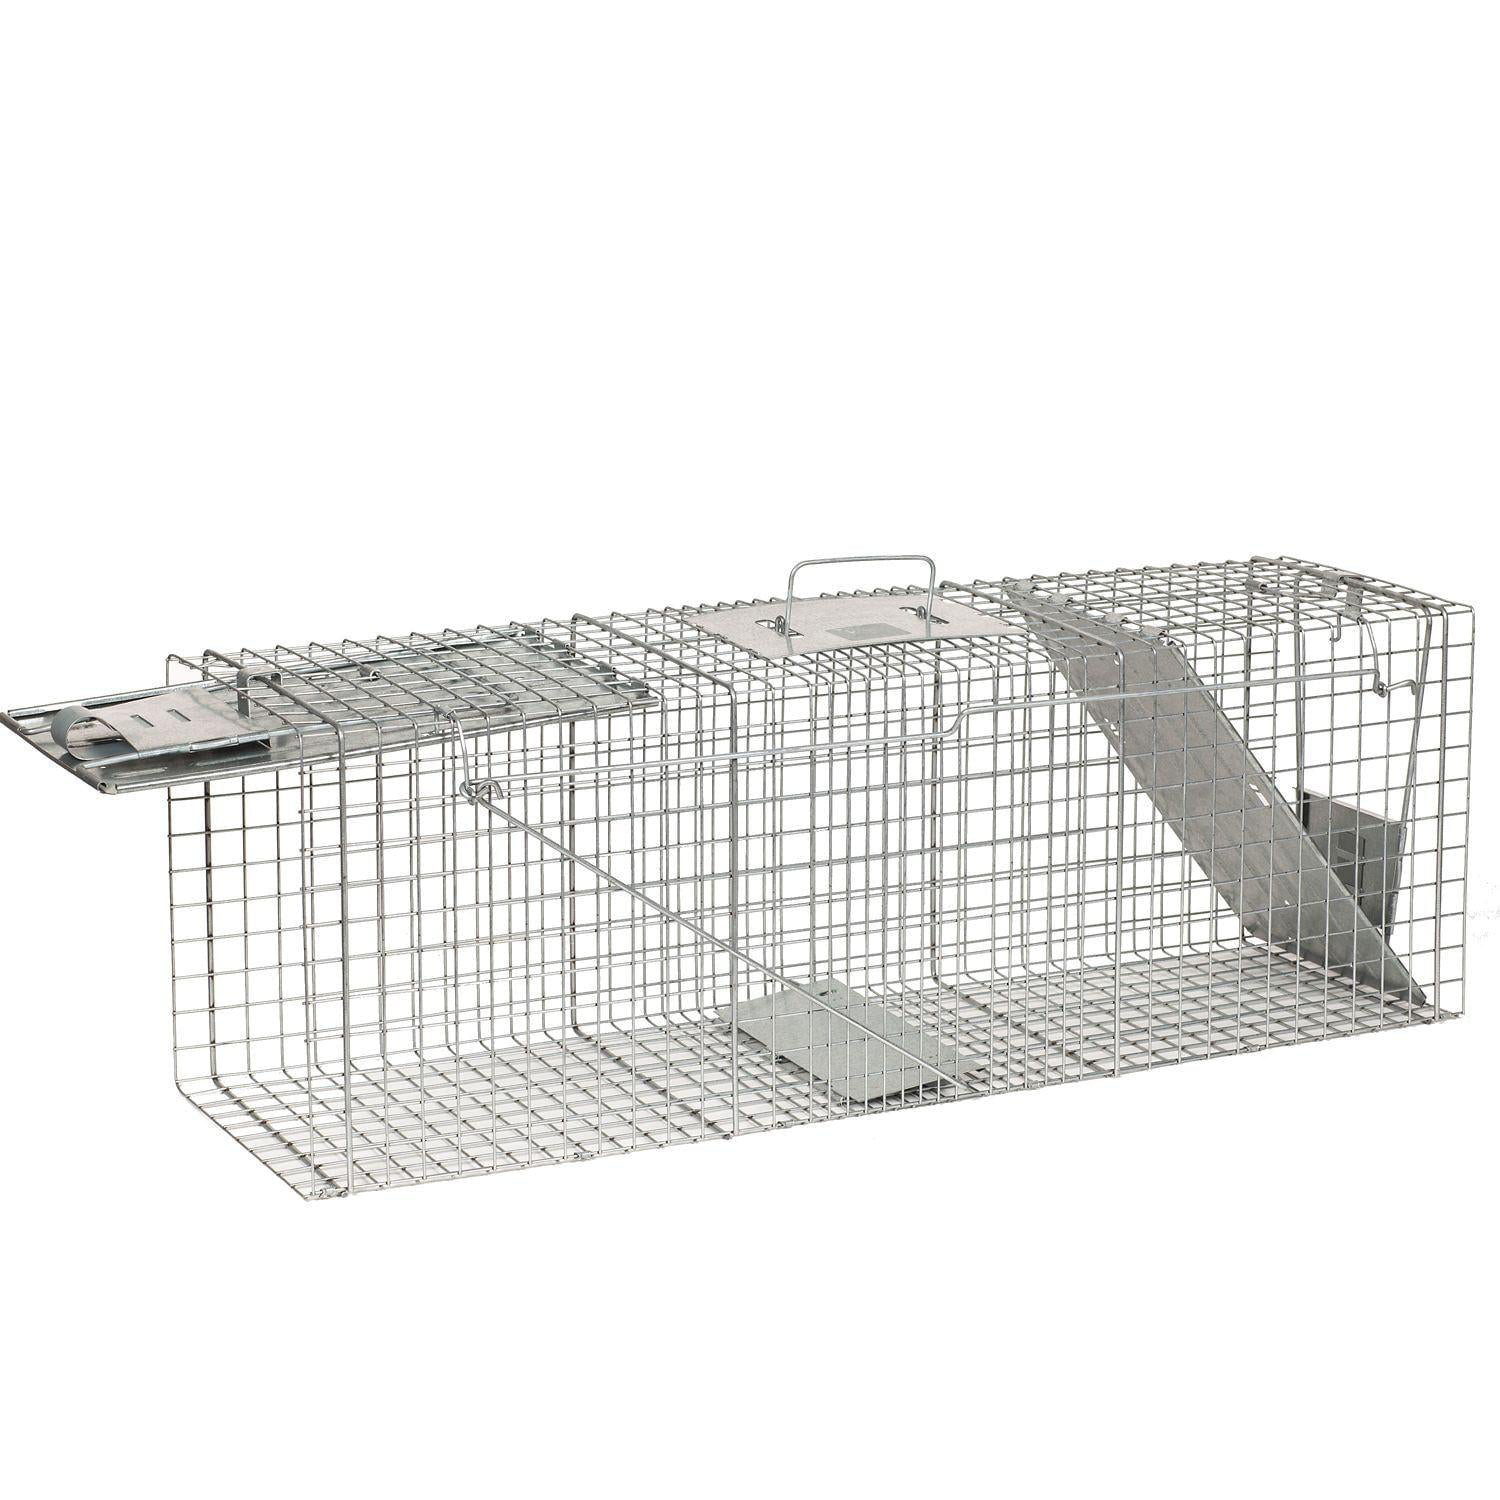 HAVAHART Live Animal Trap 32" Wire Cage RACCOONS Woodchucks Groundhogs 1079 New 